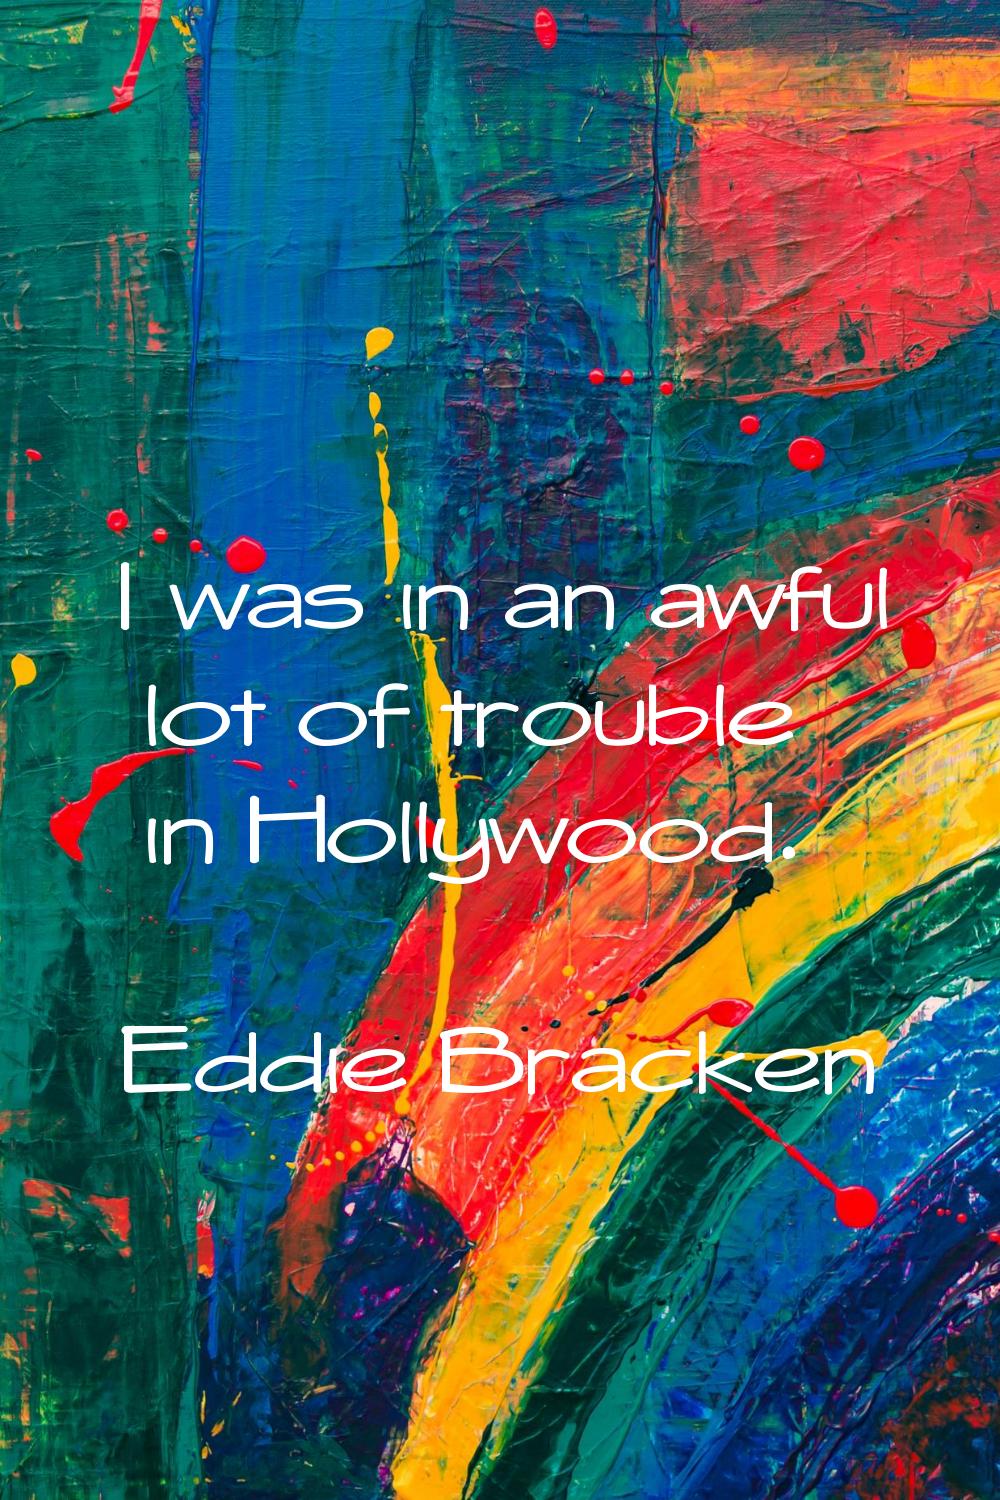 I was in an awful lot of trouble in Hollywood.